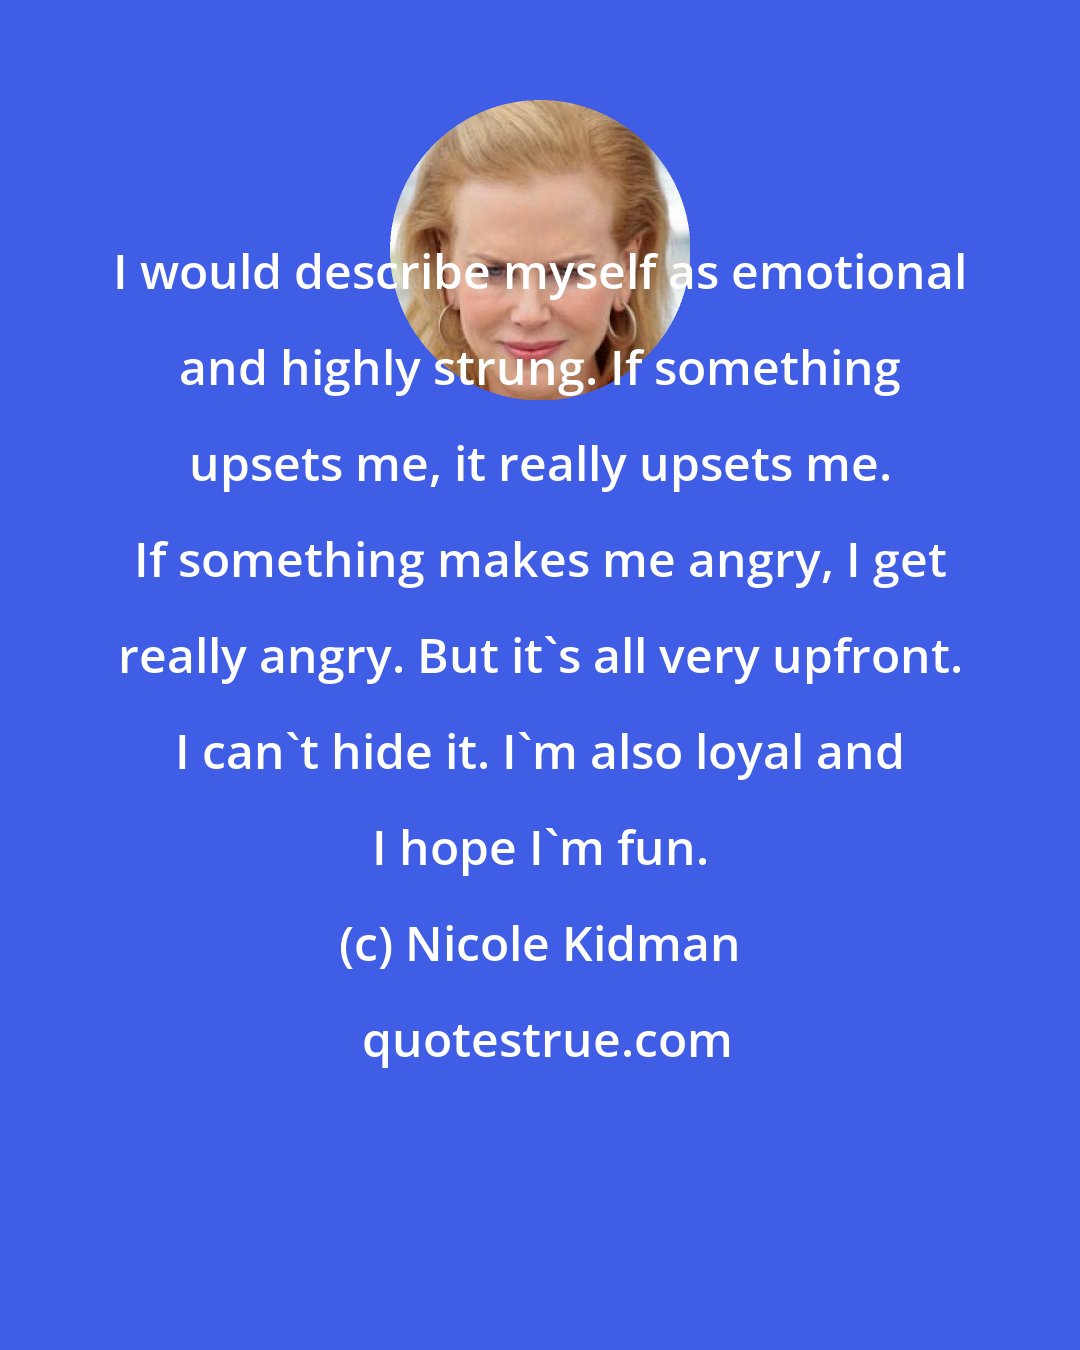 Nicole Kidman: I would describe myself as emotional and highly strung. If something upsets me, it really upsets me. If something makes me angry, I get really angry. But it's all very upfront. I can't hide it. I'm also loyal and I hope I'm fun.